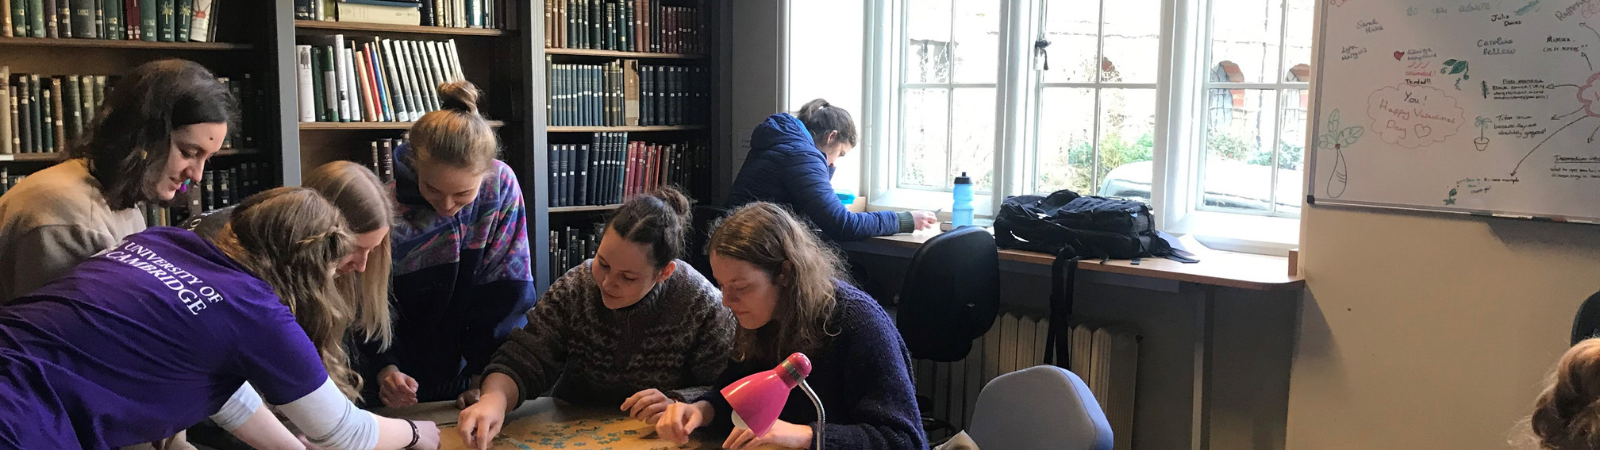 Students studying together in the Plant Sciences Library space